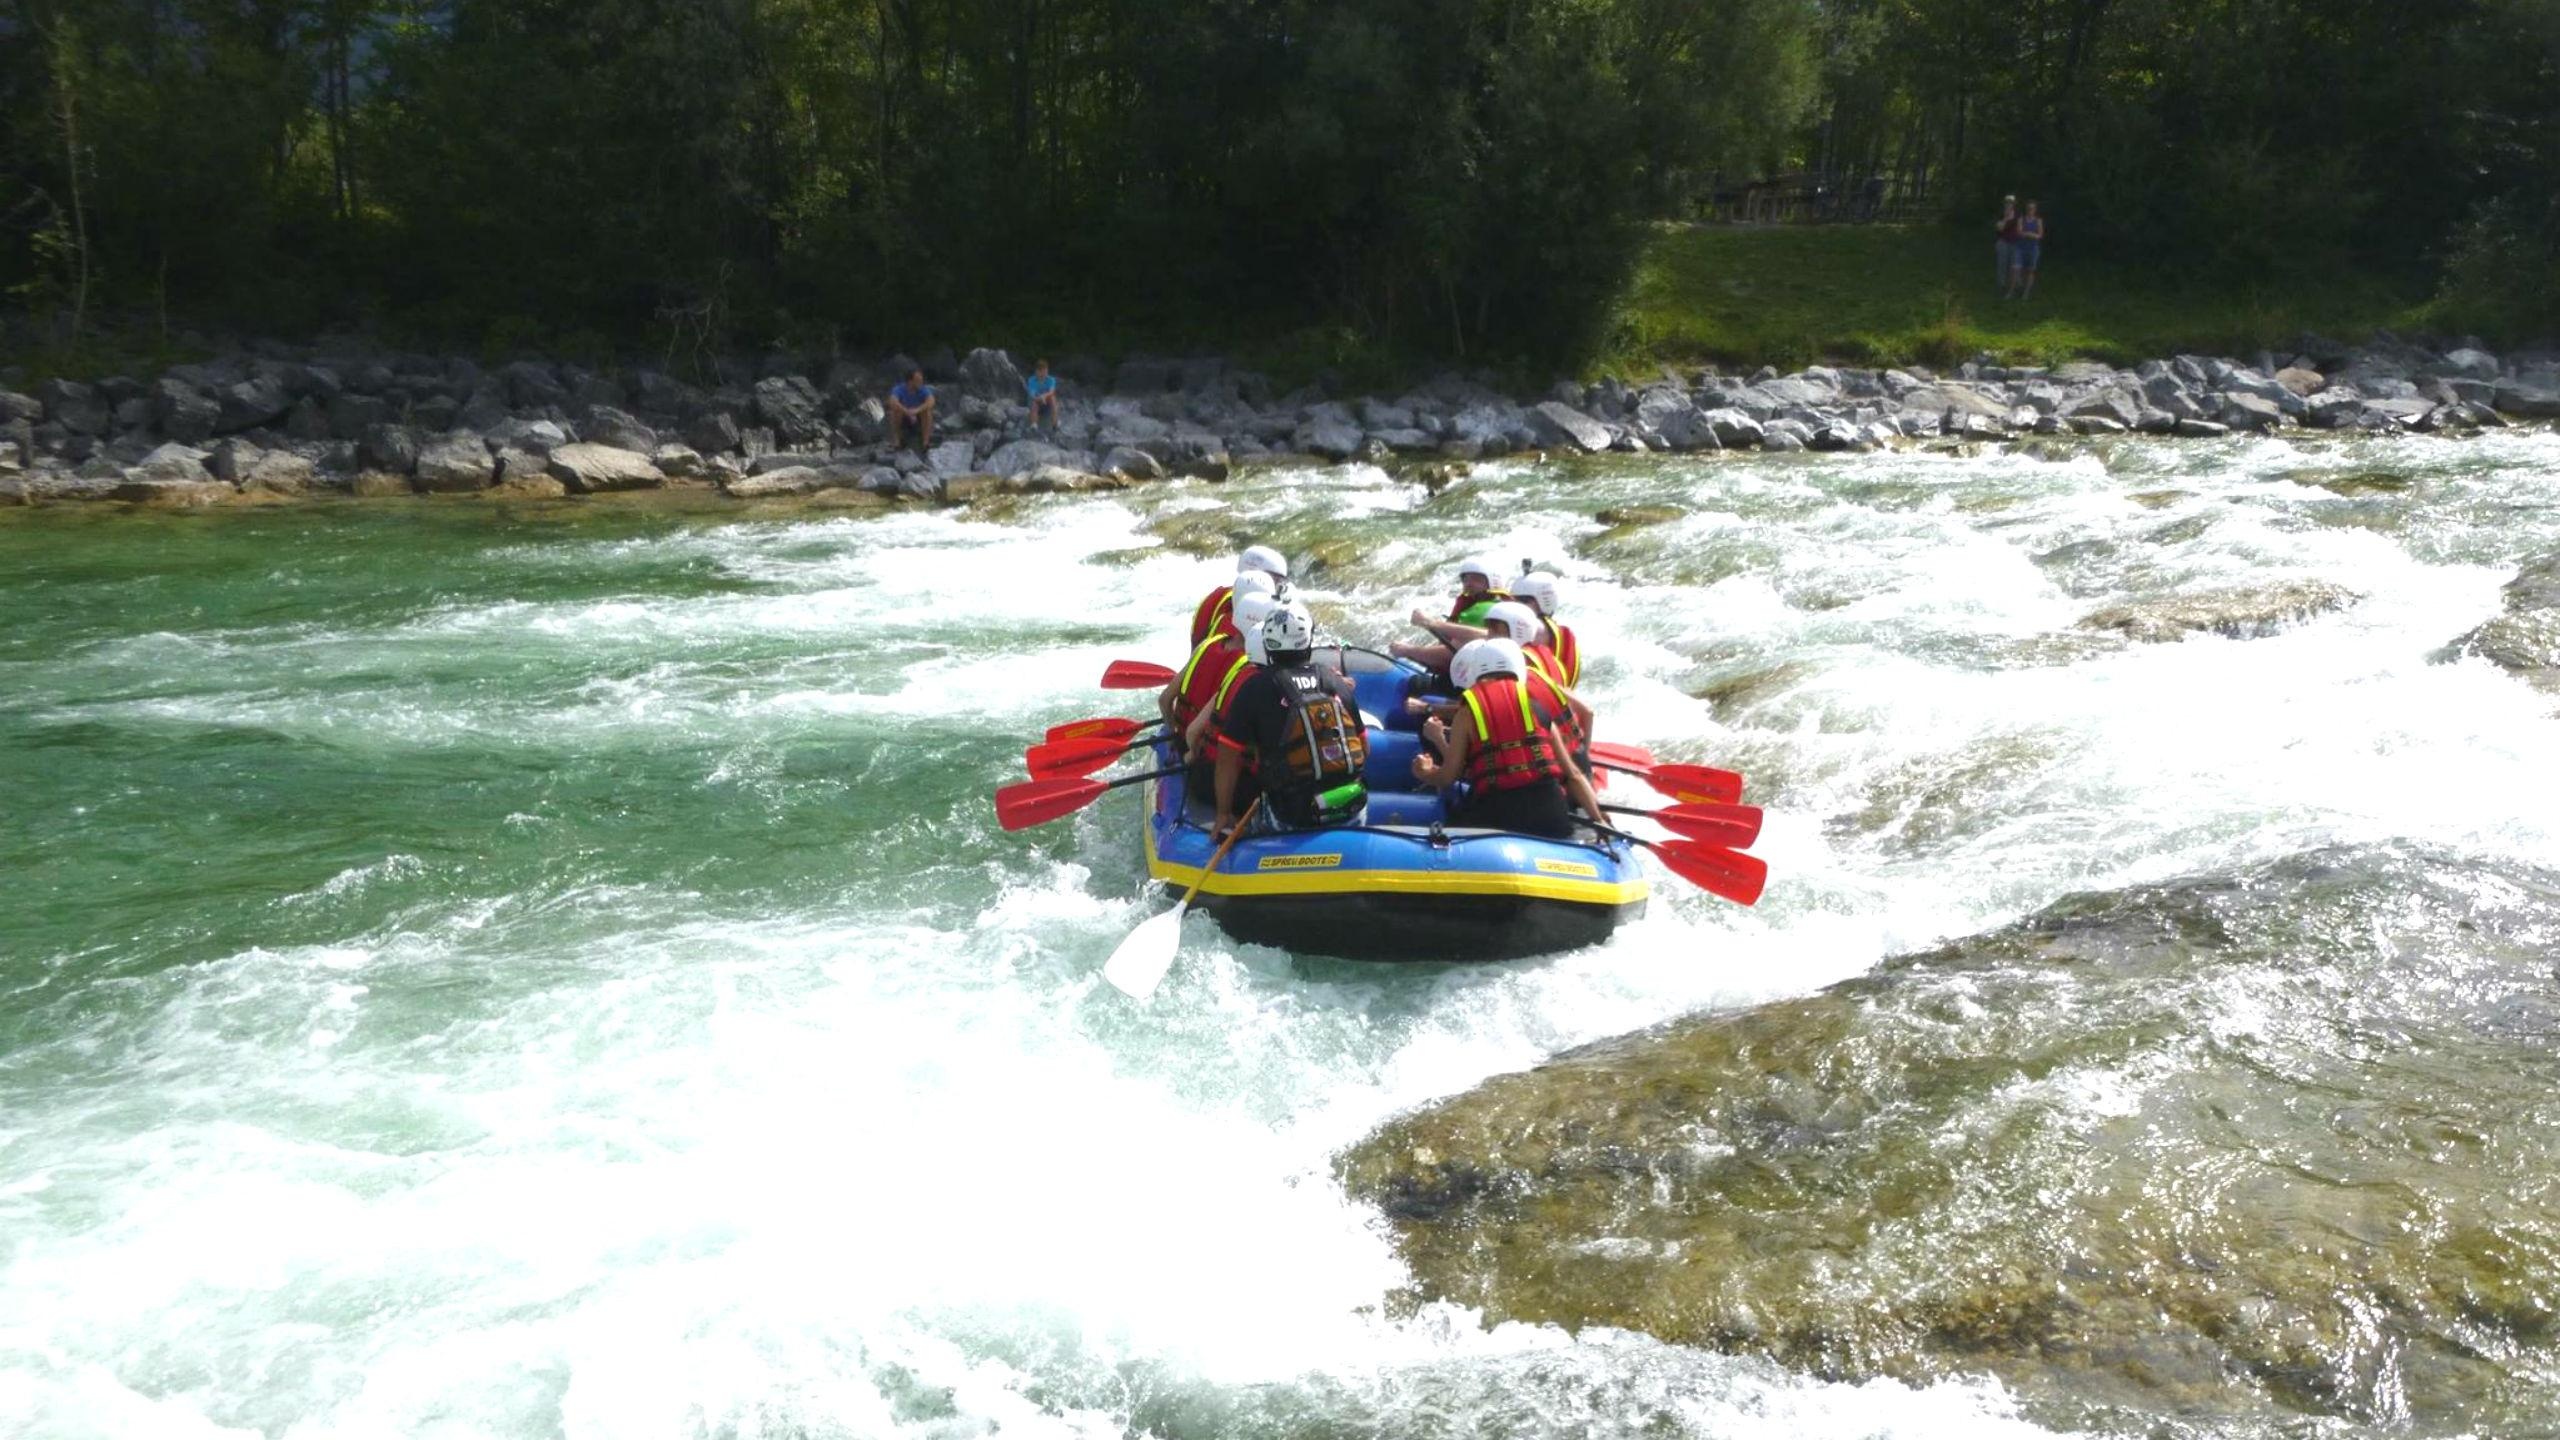 Isar River rafting, Bachelor party adventure, Thrilling experience, Checkyeti, 2560x1440 HD Desktop